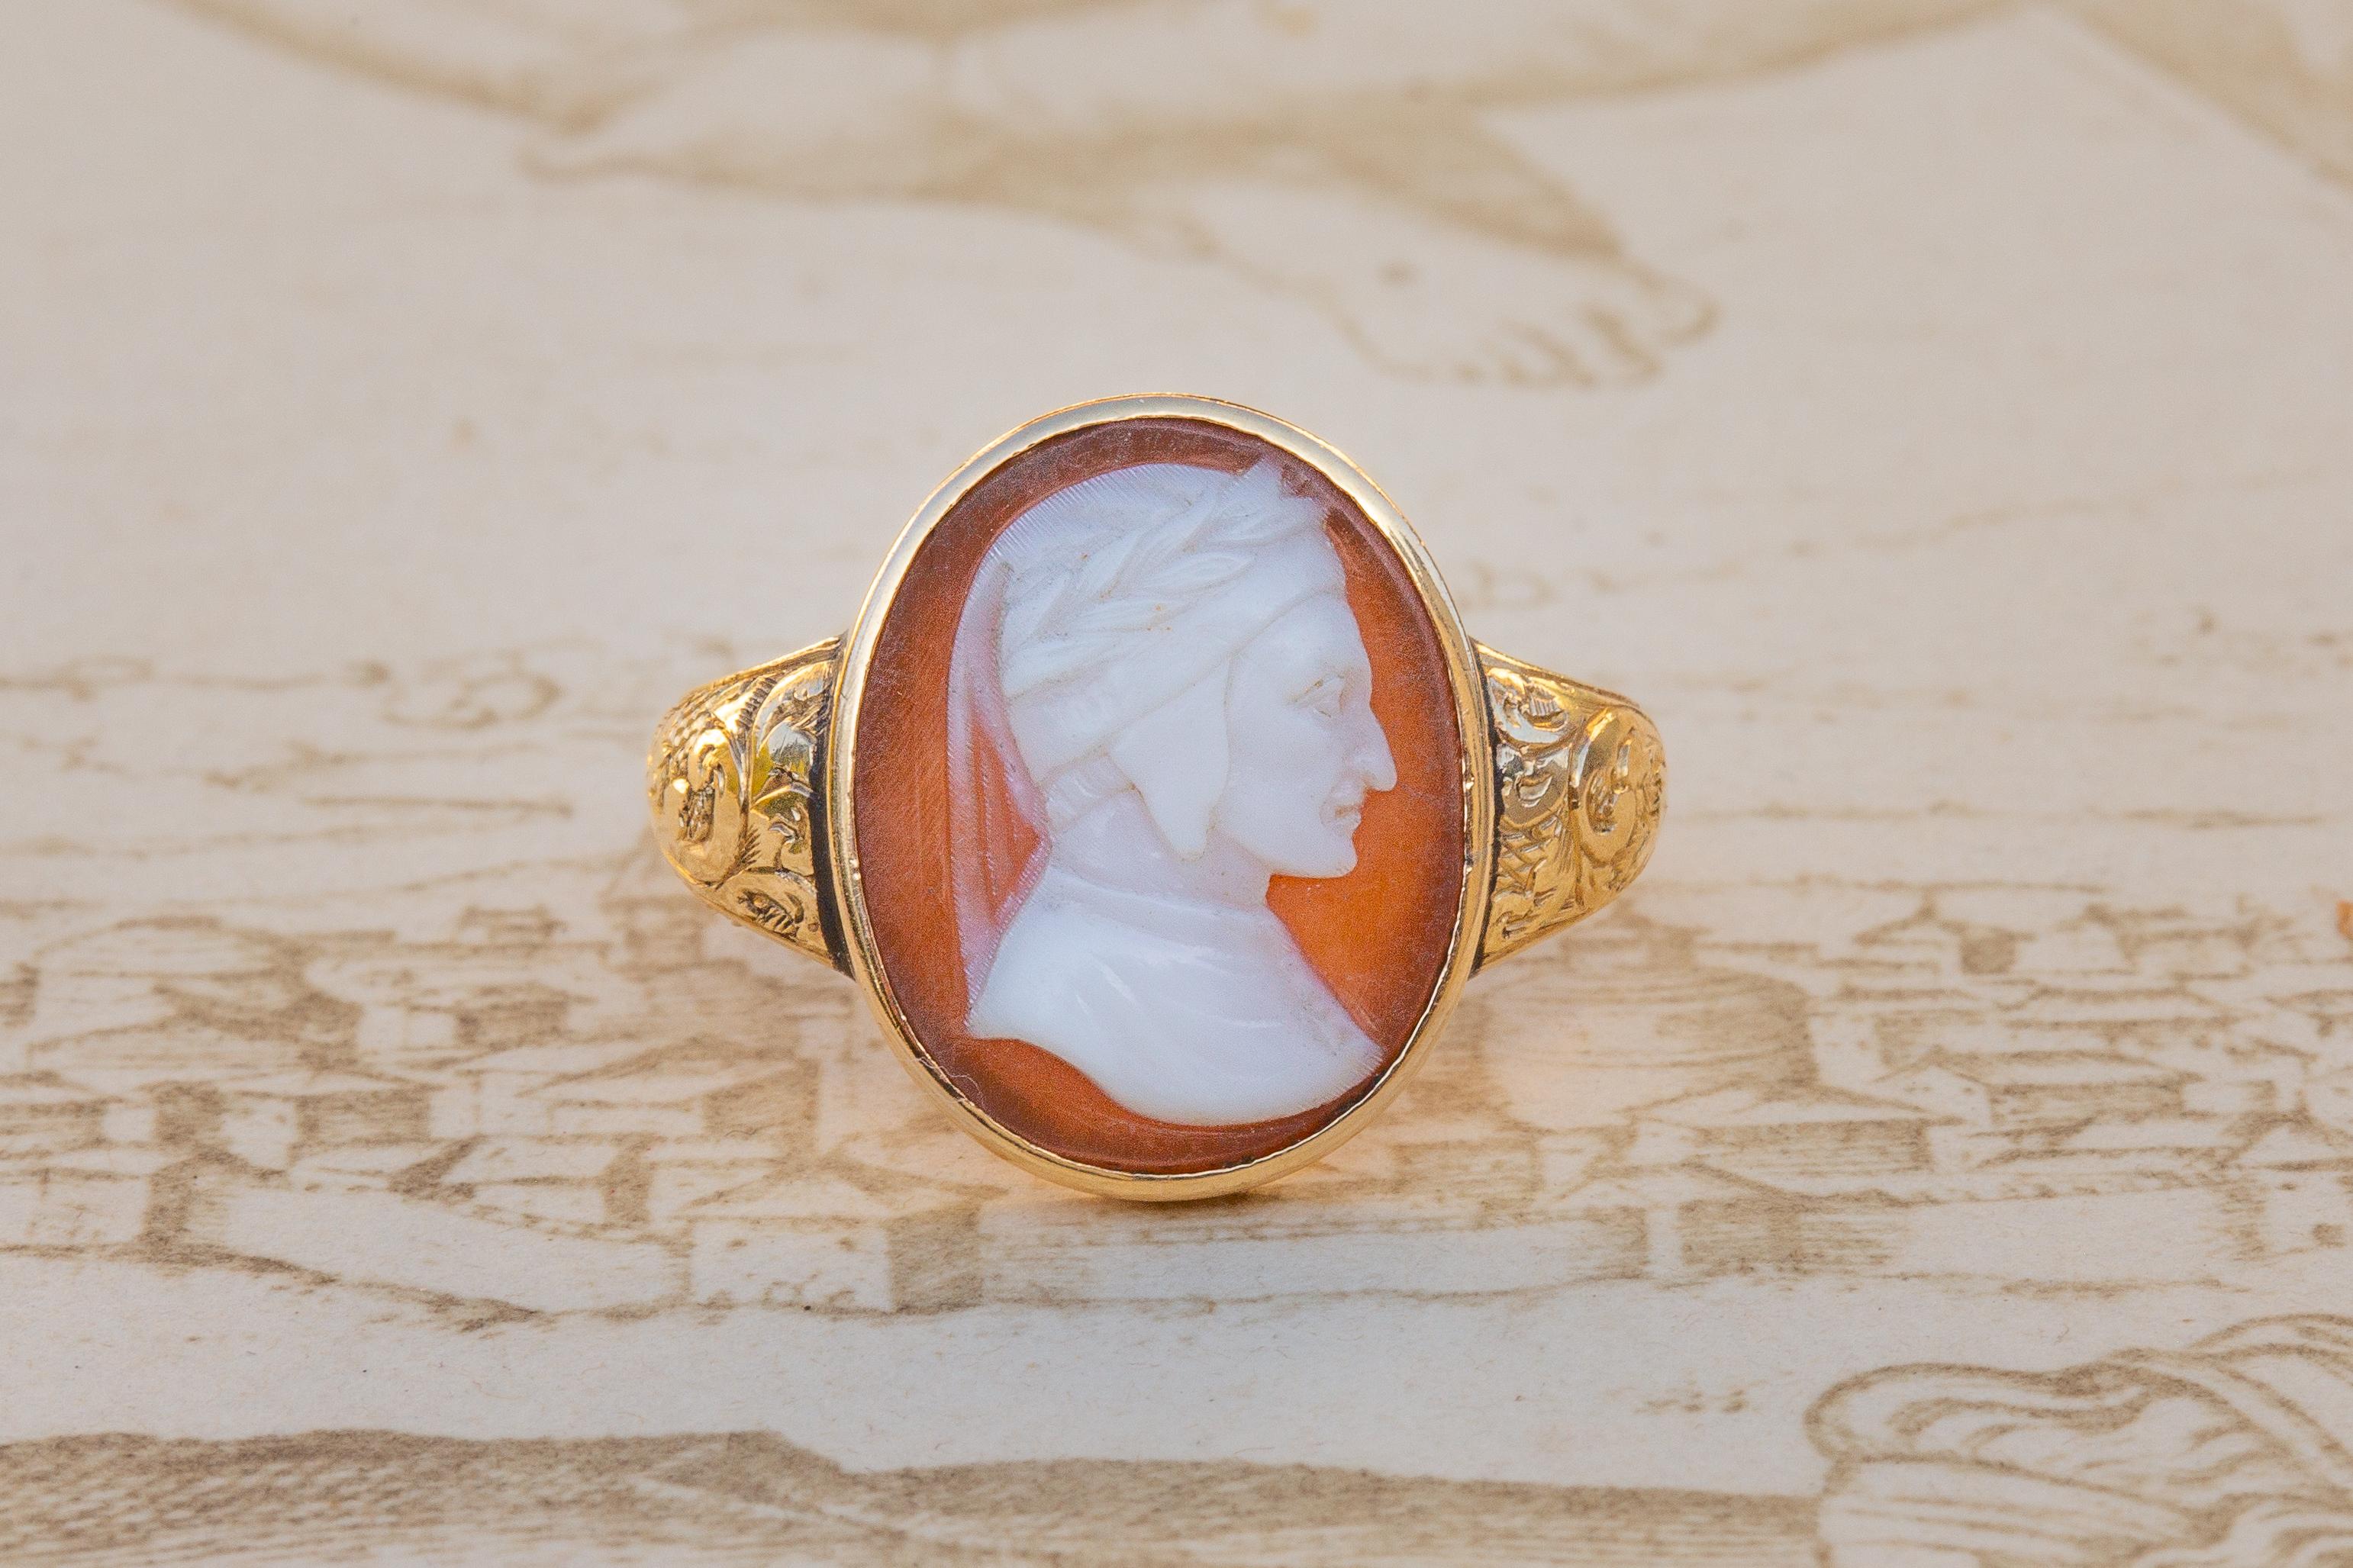 An excellent antique Italian cameo dating to the second half of the 19th century, circa 1865. The finely carved shell cameo depicts the profile head of ‘Il Sommo Poeta', the supreme poet, Dante Alighieri. 

An example with the same carving of Dante